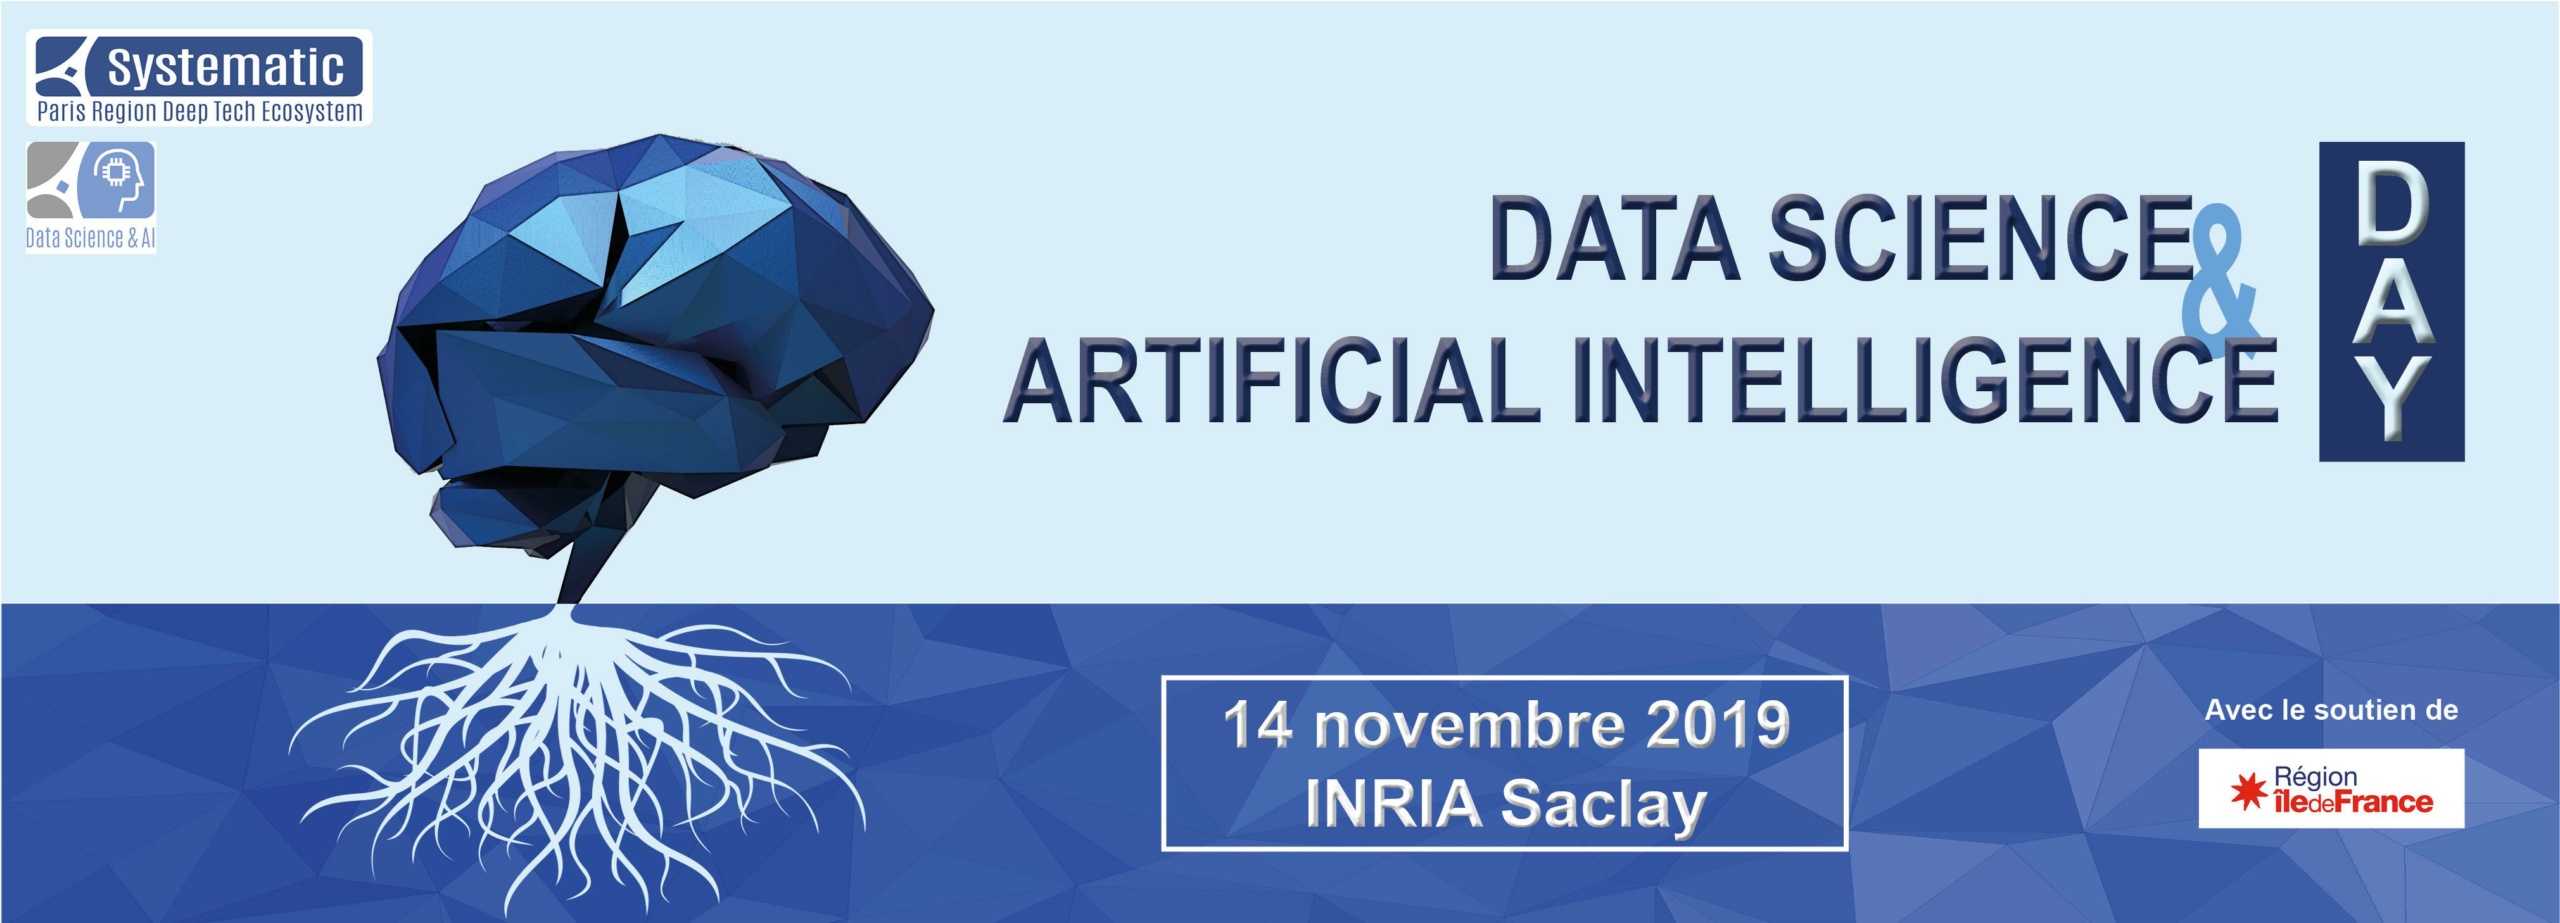 Data Science & Artificial Intelligence DAY